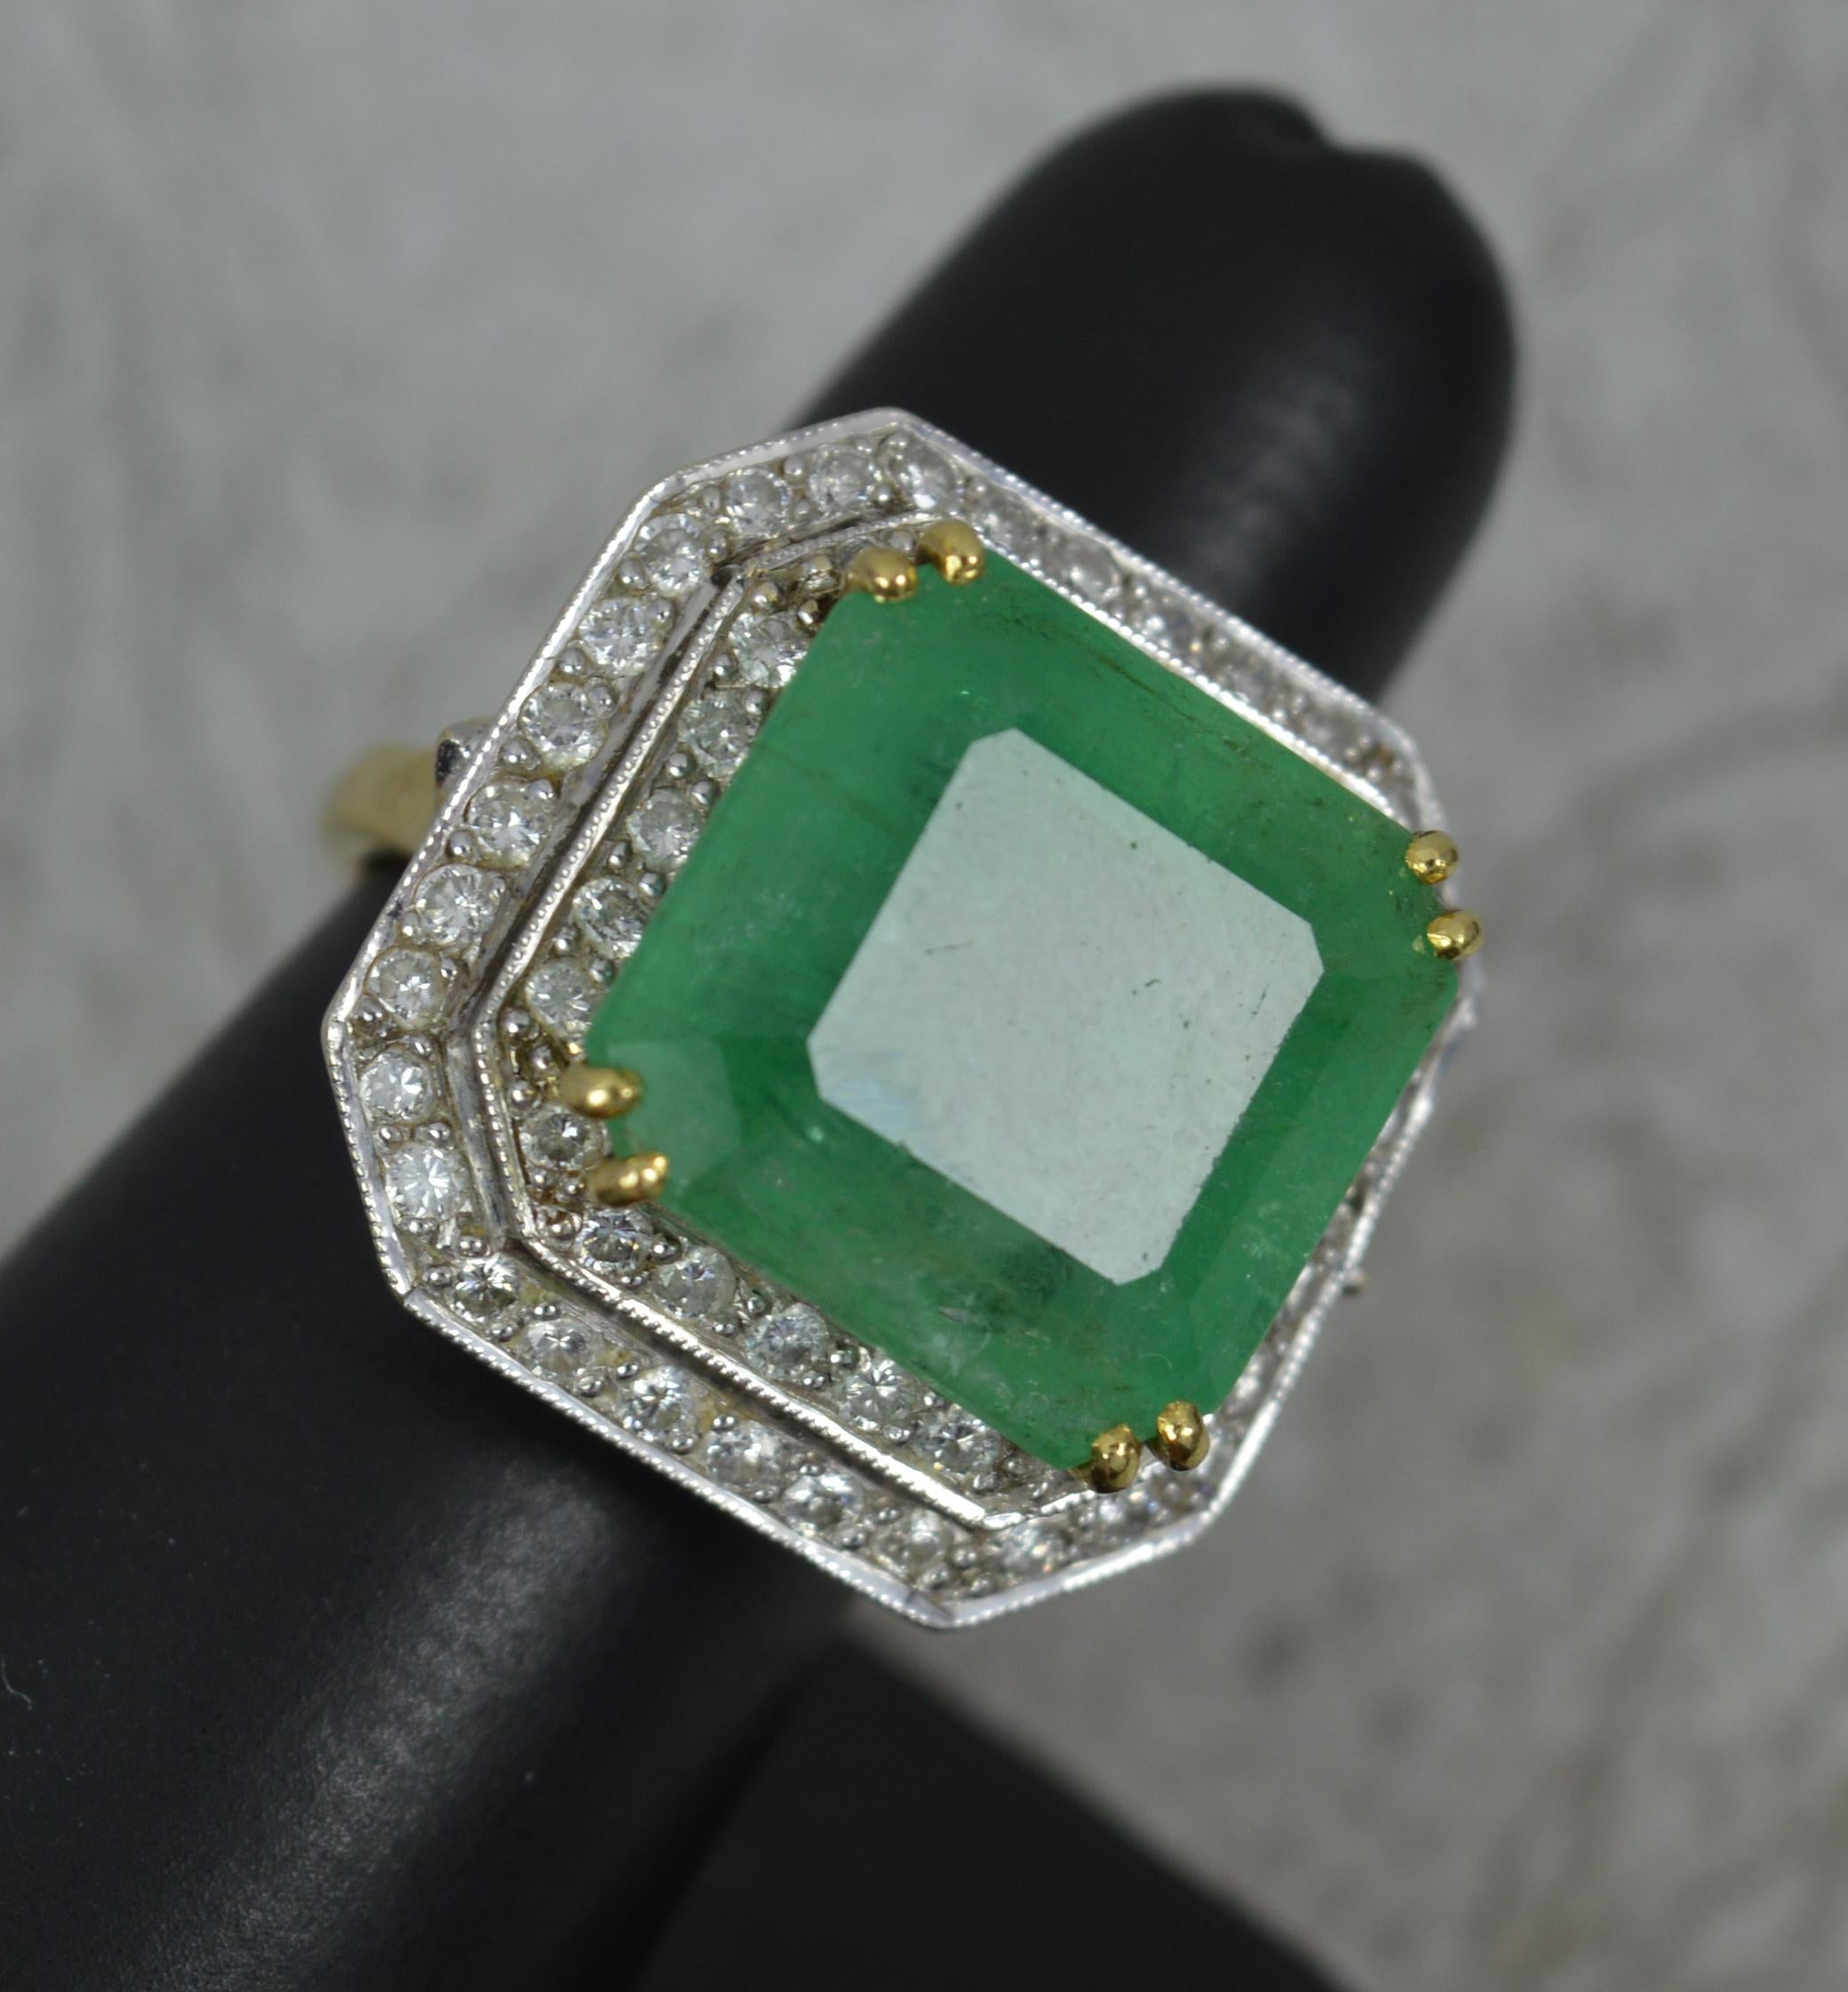 A stunning and large Emerald and Diamond cocktail ring.
Solid 18 carat yellow gold shank with platinum head setting.
Designed with a square shaped natural emerald to centre. 15mm x 14mm approx 15 carats. Surrounding are two rows of round brilliant